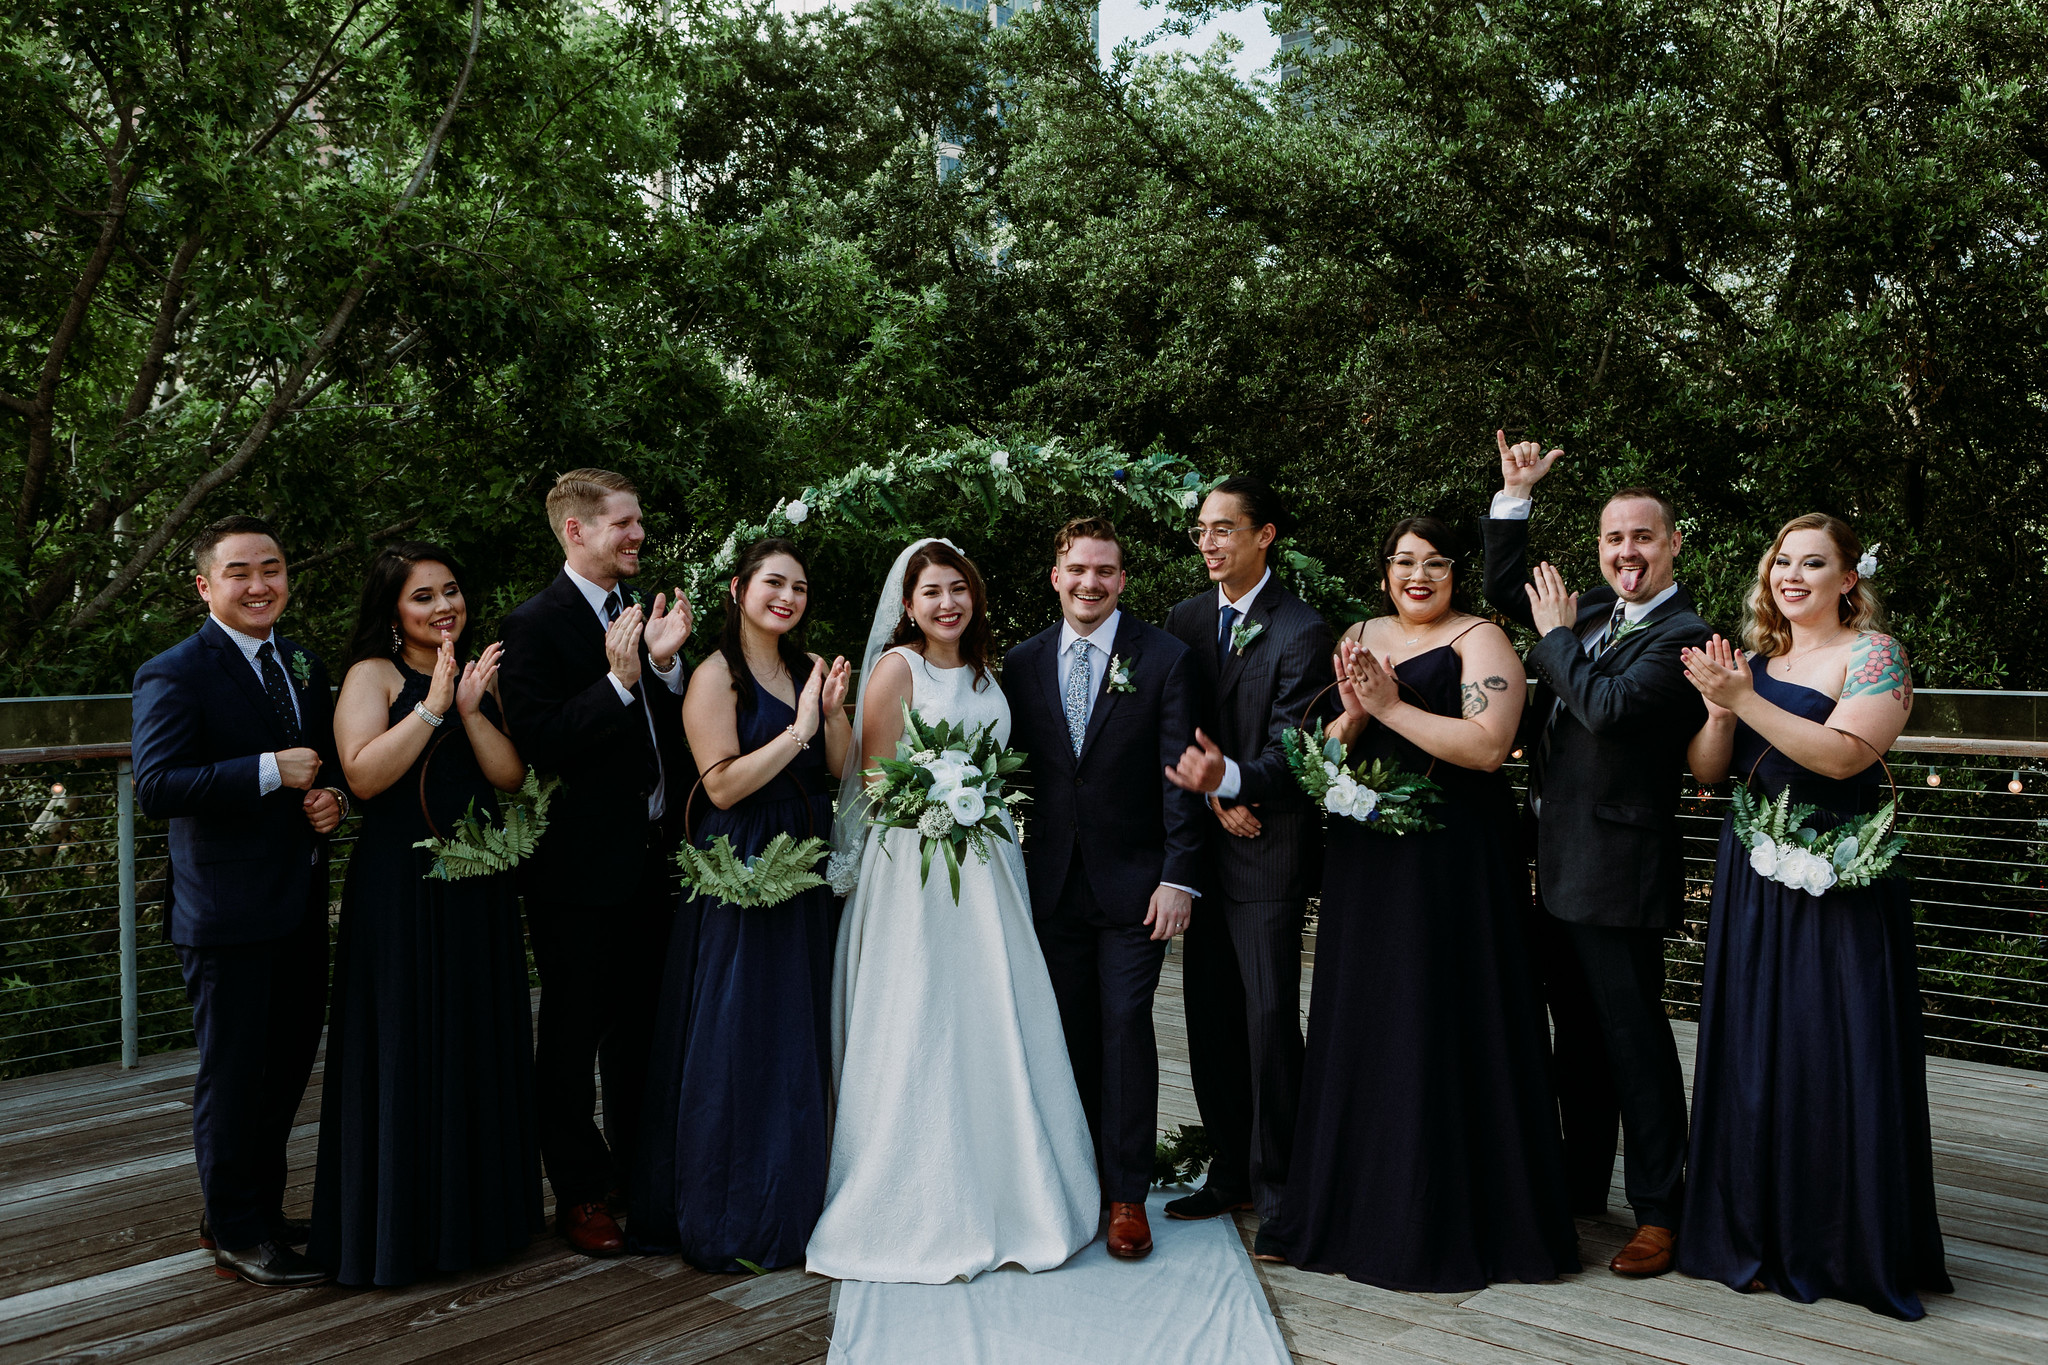 Wedding party bridal party group portraits. Wedding at The Grove at Discovery Green Park (Houston, TX)